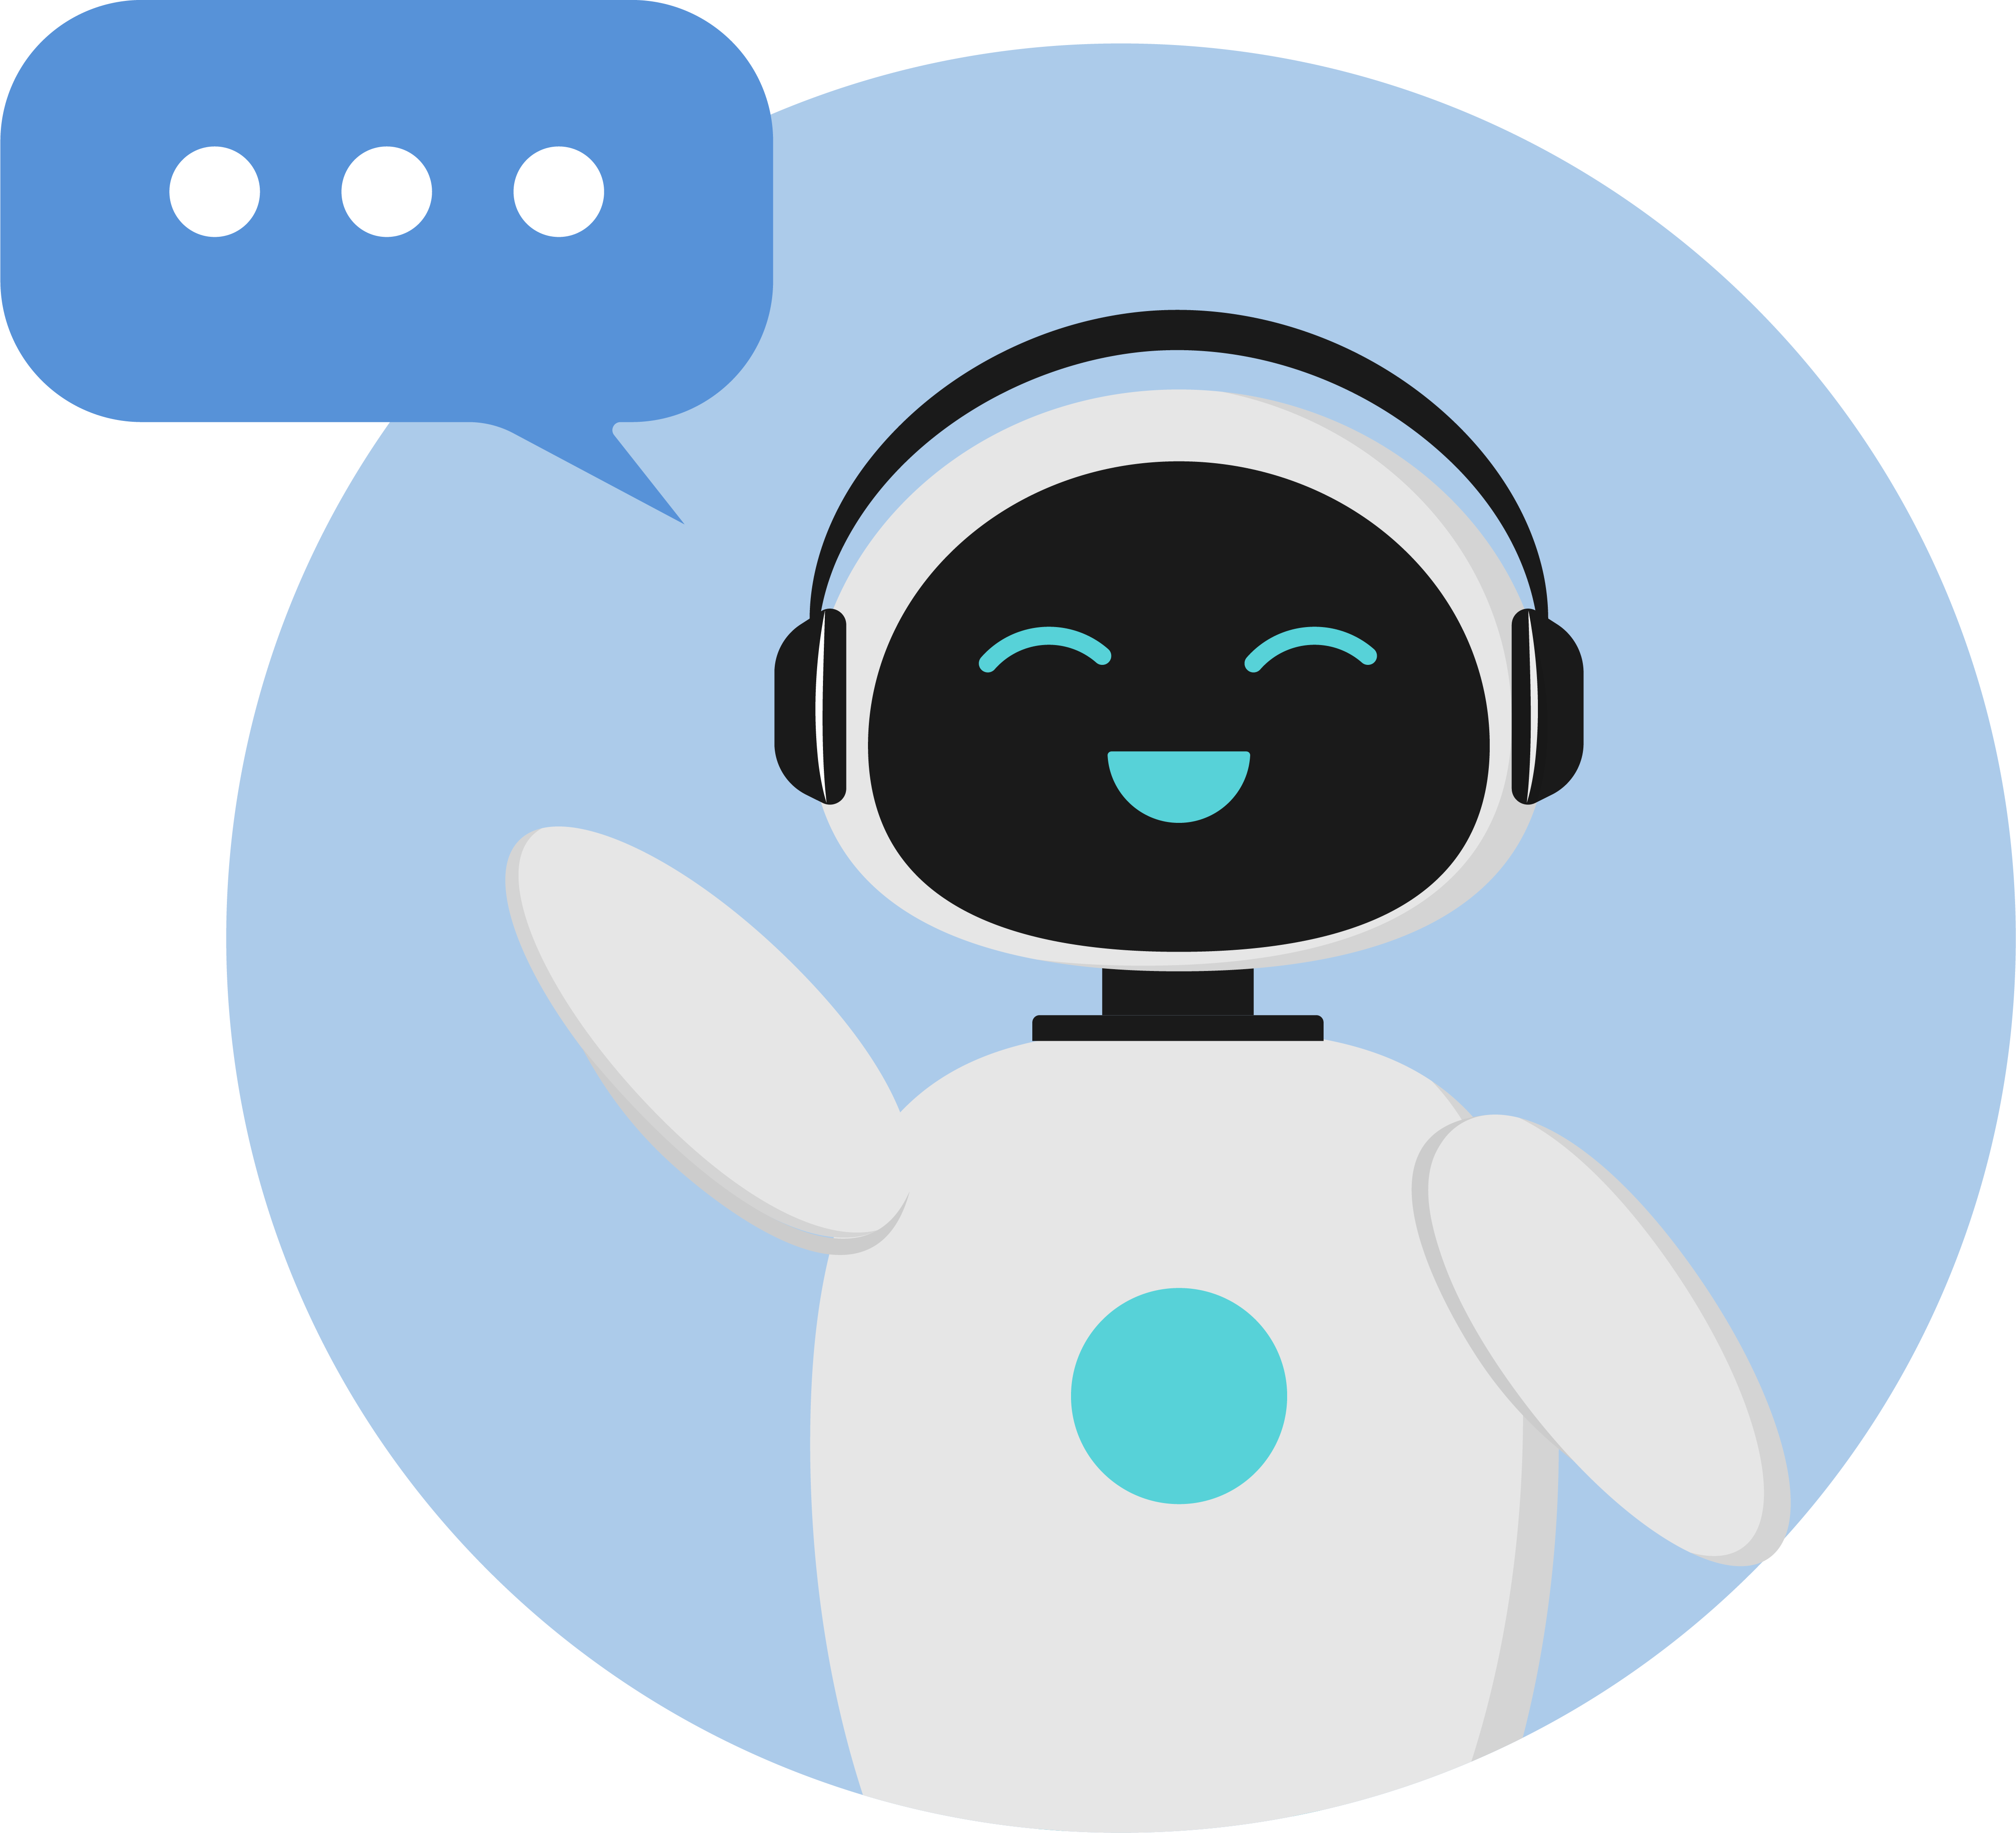 Robot Avatar Icons, Download SVG, PNG, EPS Icons